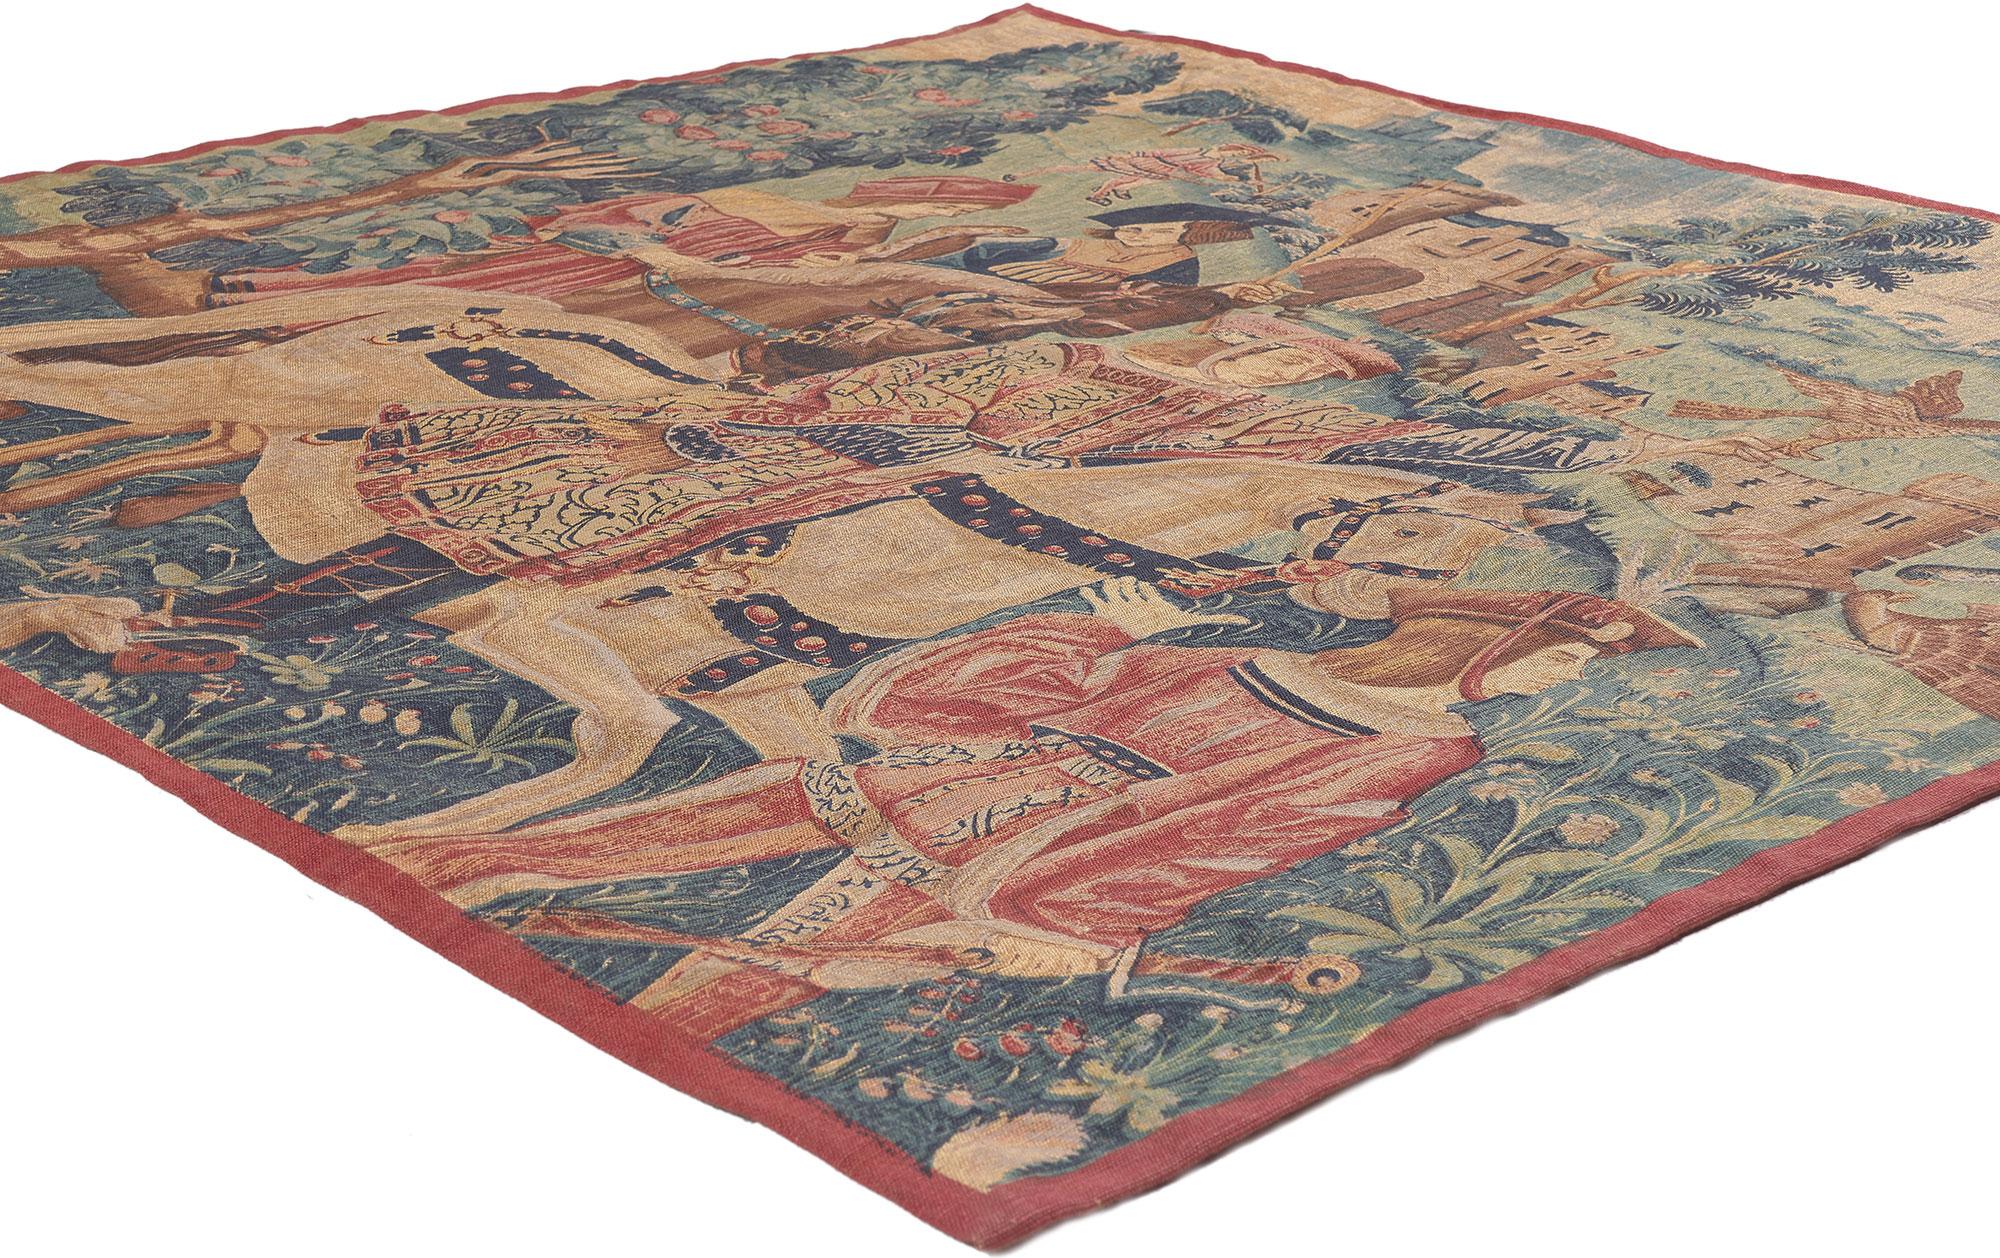 78549 Vintage Les Editions d'Art de Rambouillet French Tapestry, 04'09 x 05'01.
Emanating Medieval style with incredible detail and texutre, this handwoven vintage French tapestry is a captivating vision of woven beauty. The decorative detailing and